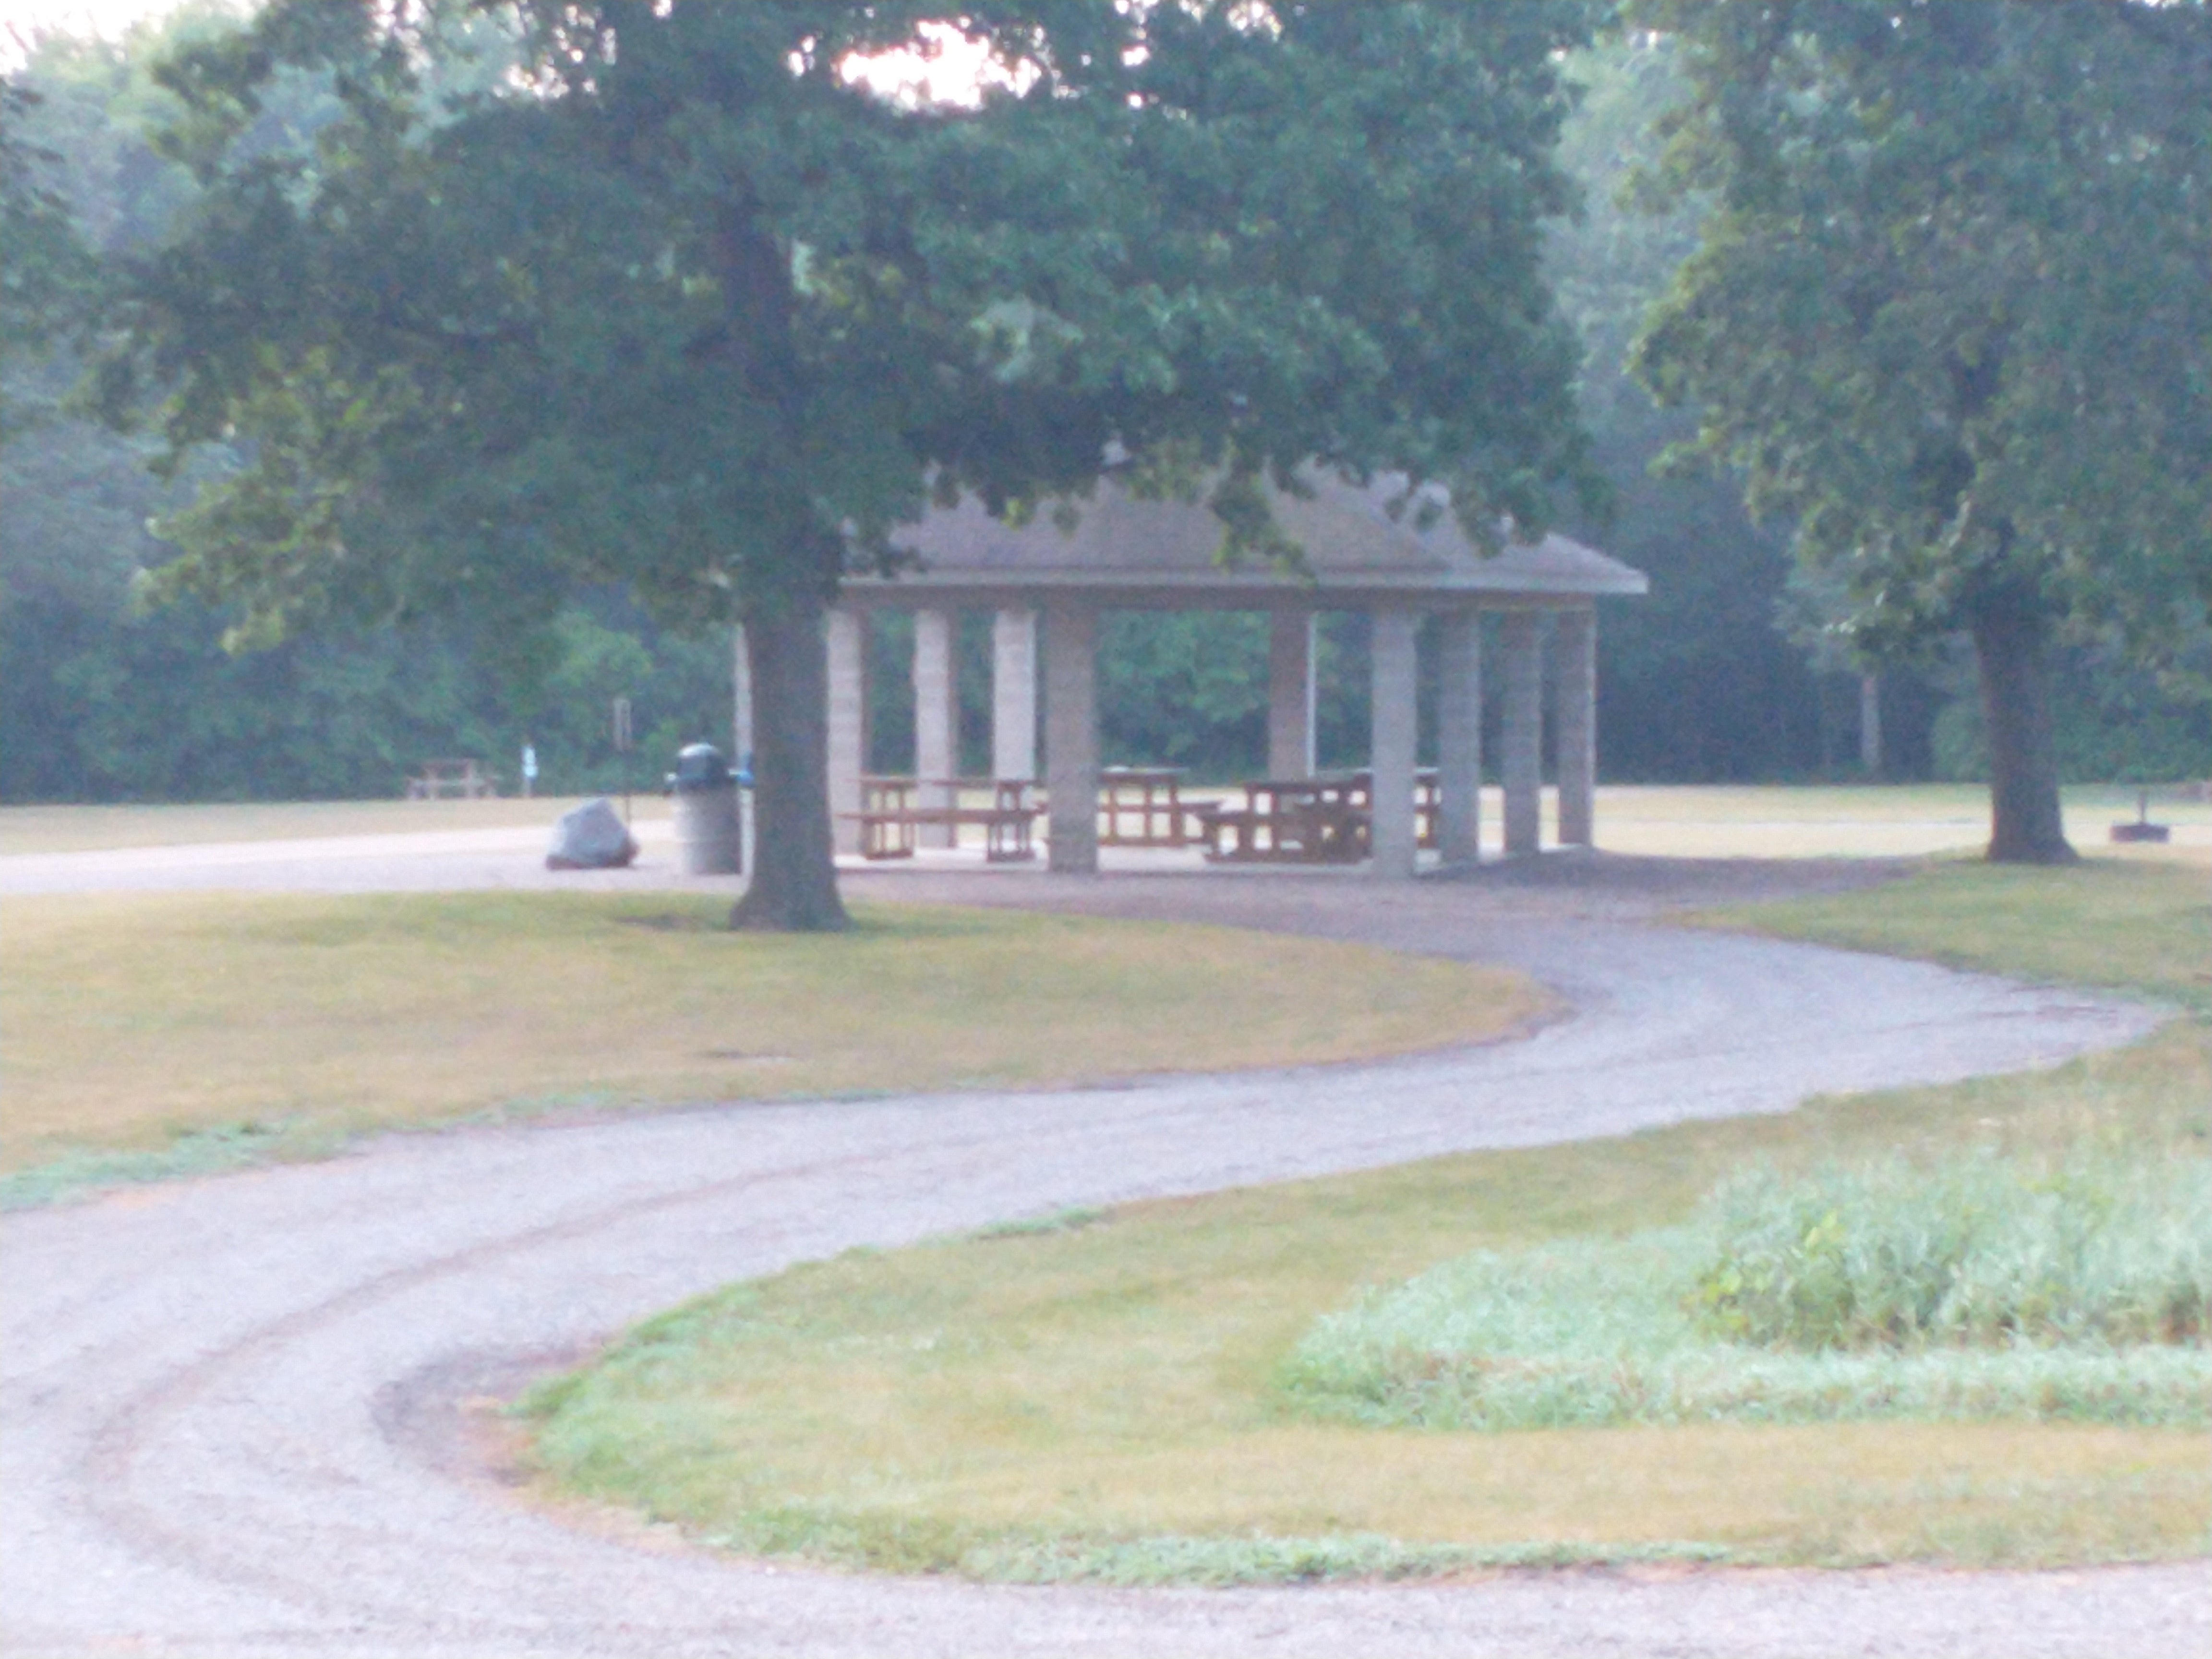 Camper submitted image from Vicksburg Co Park - 4